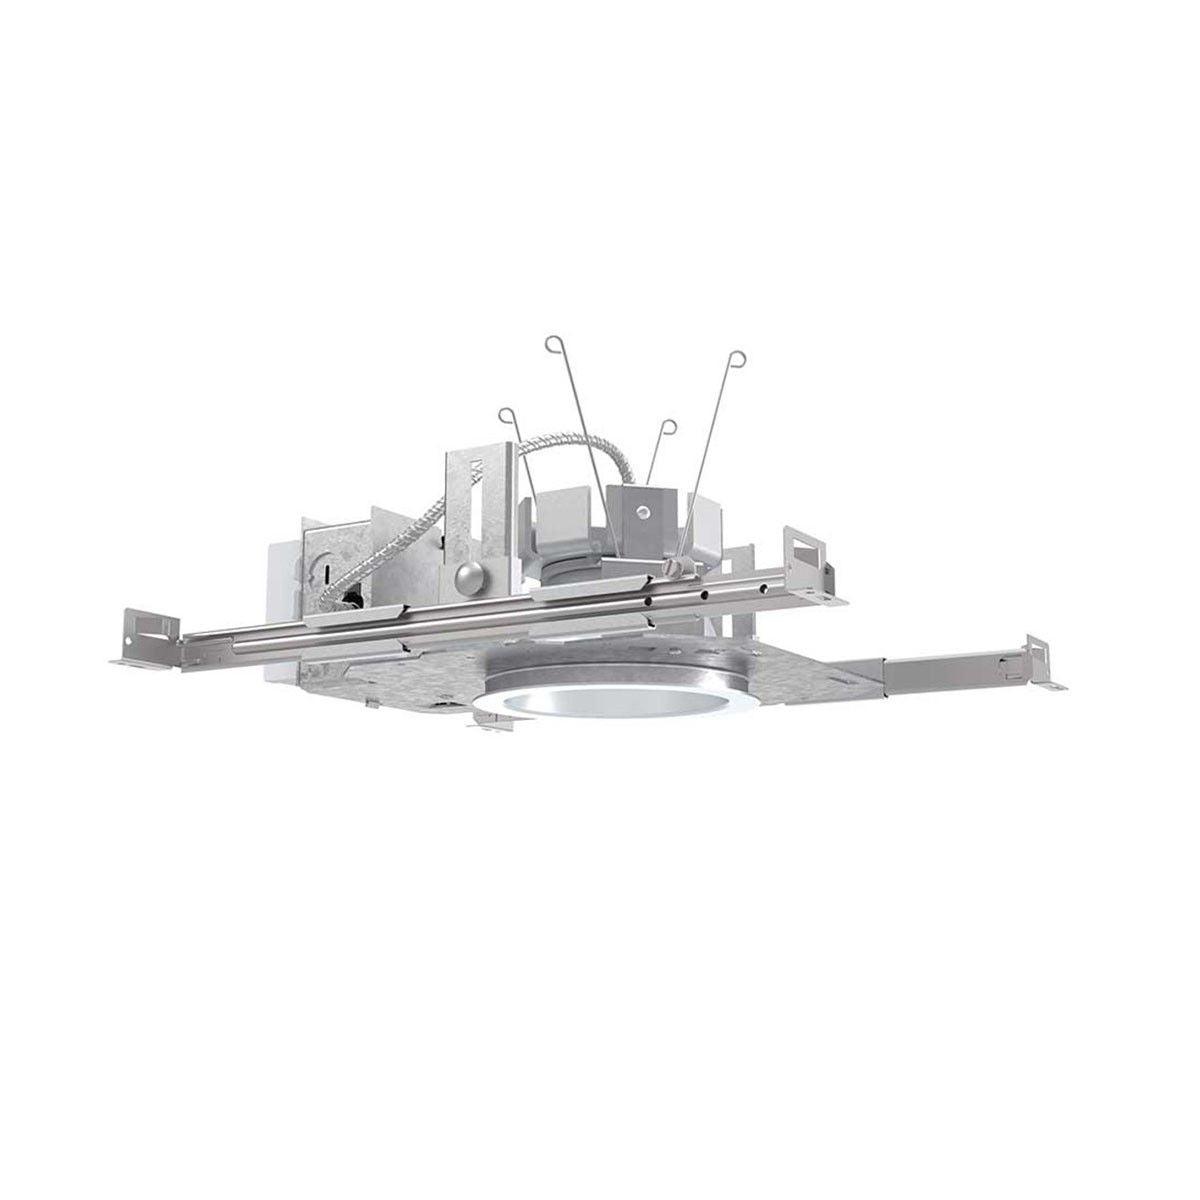 Lithonia LDN4 Commercial LED Recessed Downlight, 2700 Lumens Adjustable, Selectable CCT, 30K/35K/40K/50K, Battery Backup Included (Reflector Sold Separately)